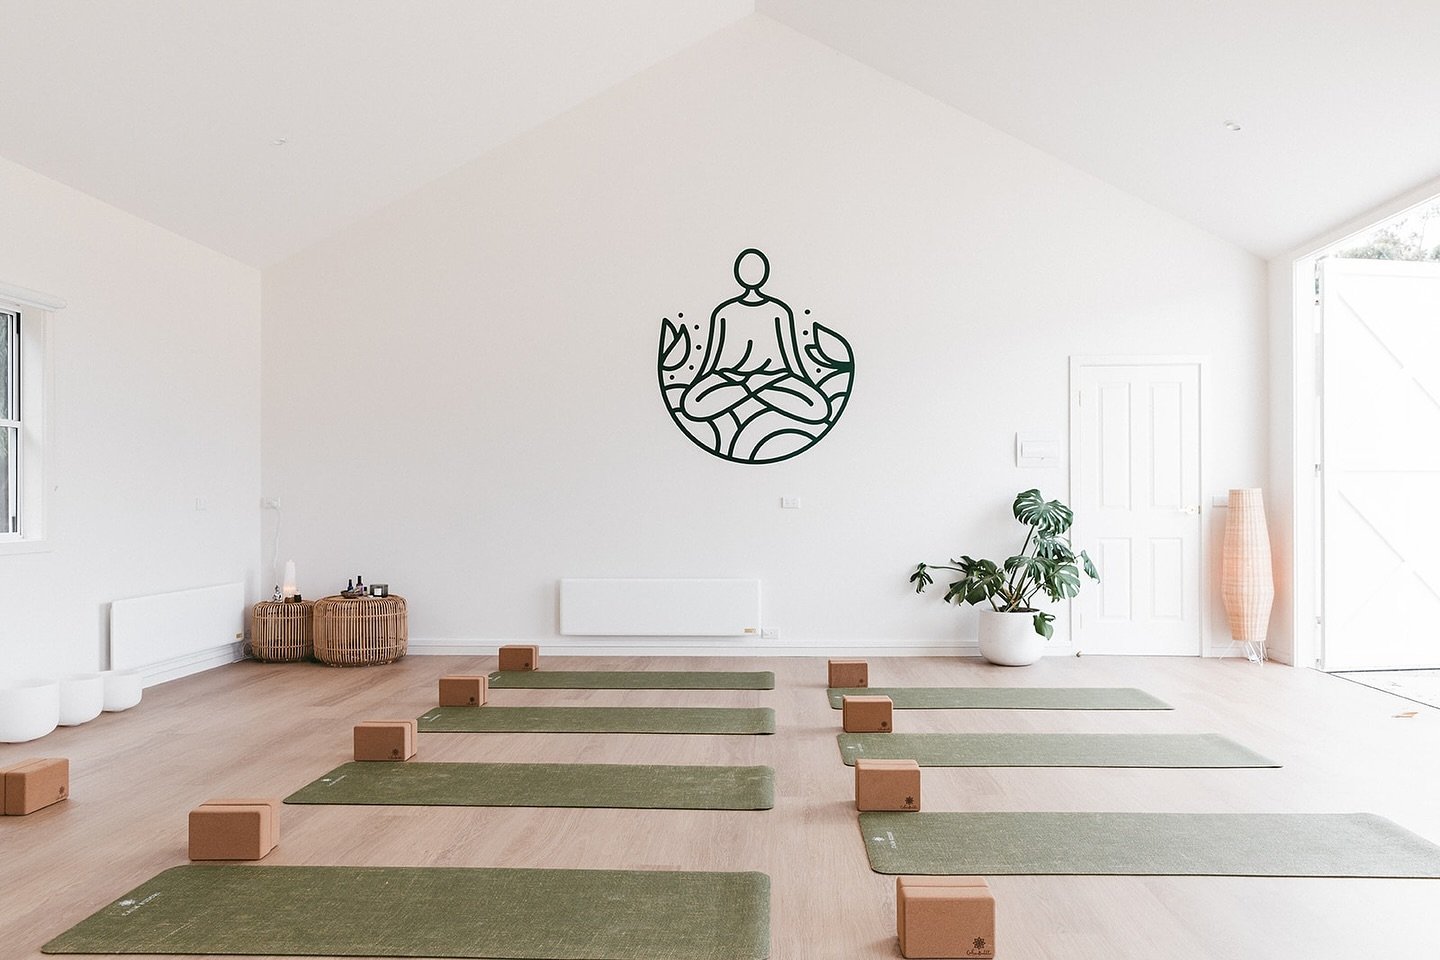 Today in a week, I am starting back casual group classes in the studio after many of you have asked! 😍

There will be two weekly classes on offer:

✨ Tuesday 6.00pm Yoga RELAX (60 min)
✨ Thursday 6.00pm Yoga GENTLE (60 min)

Both classes are suitabl